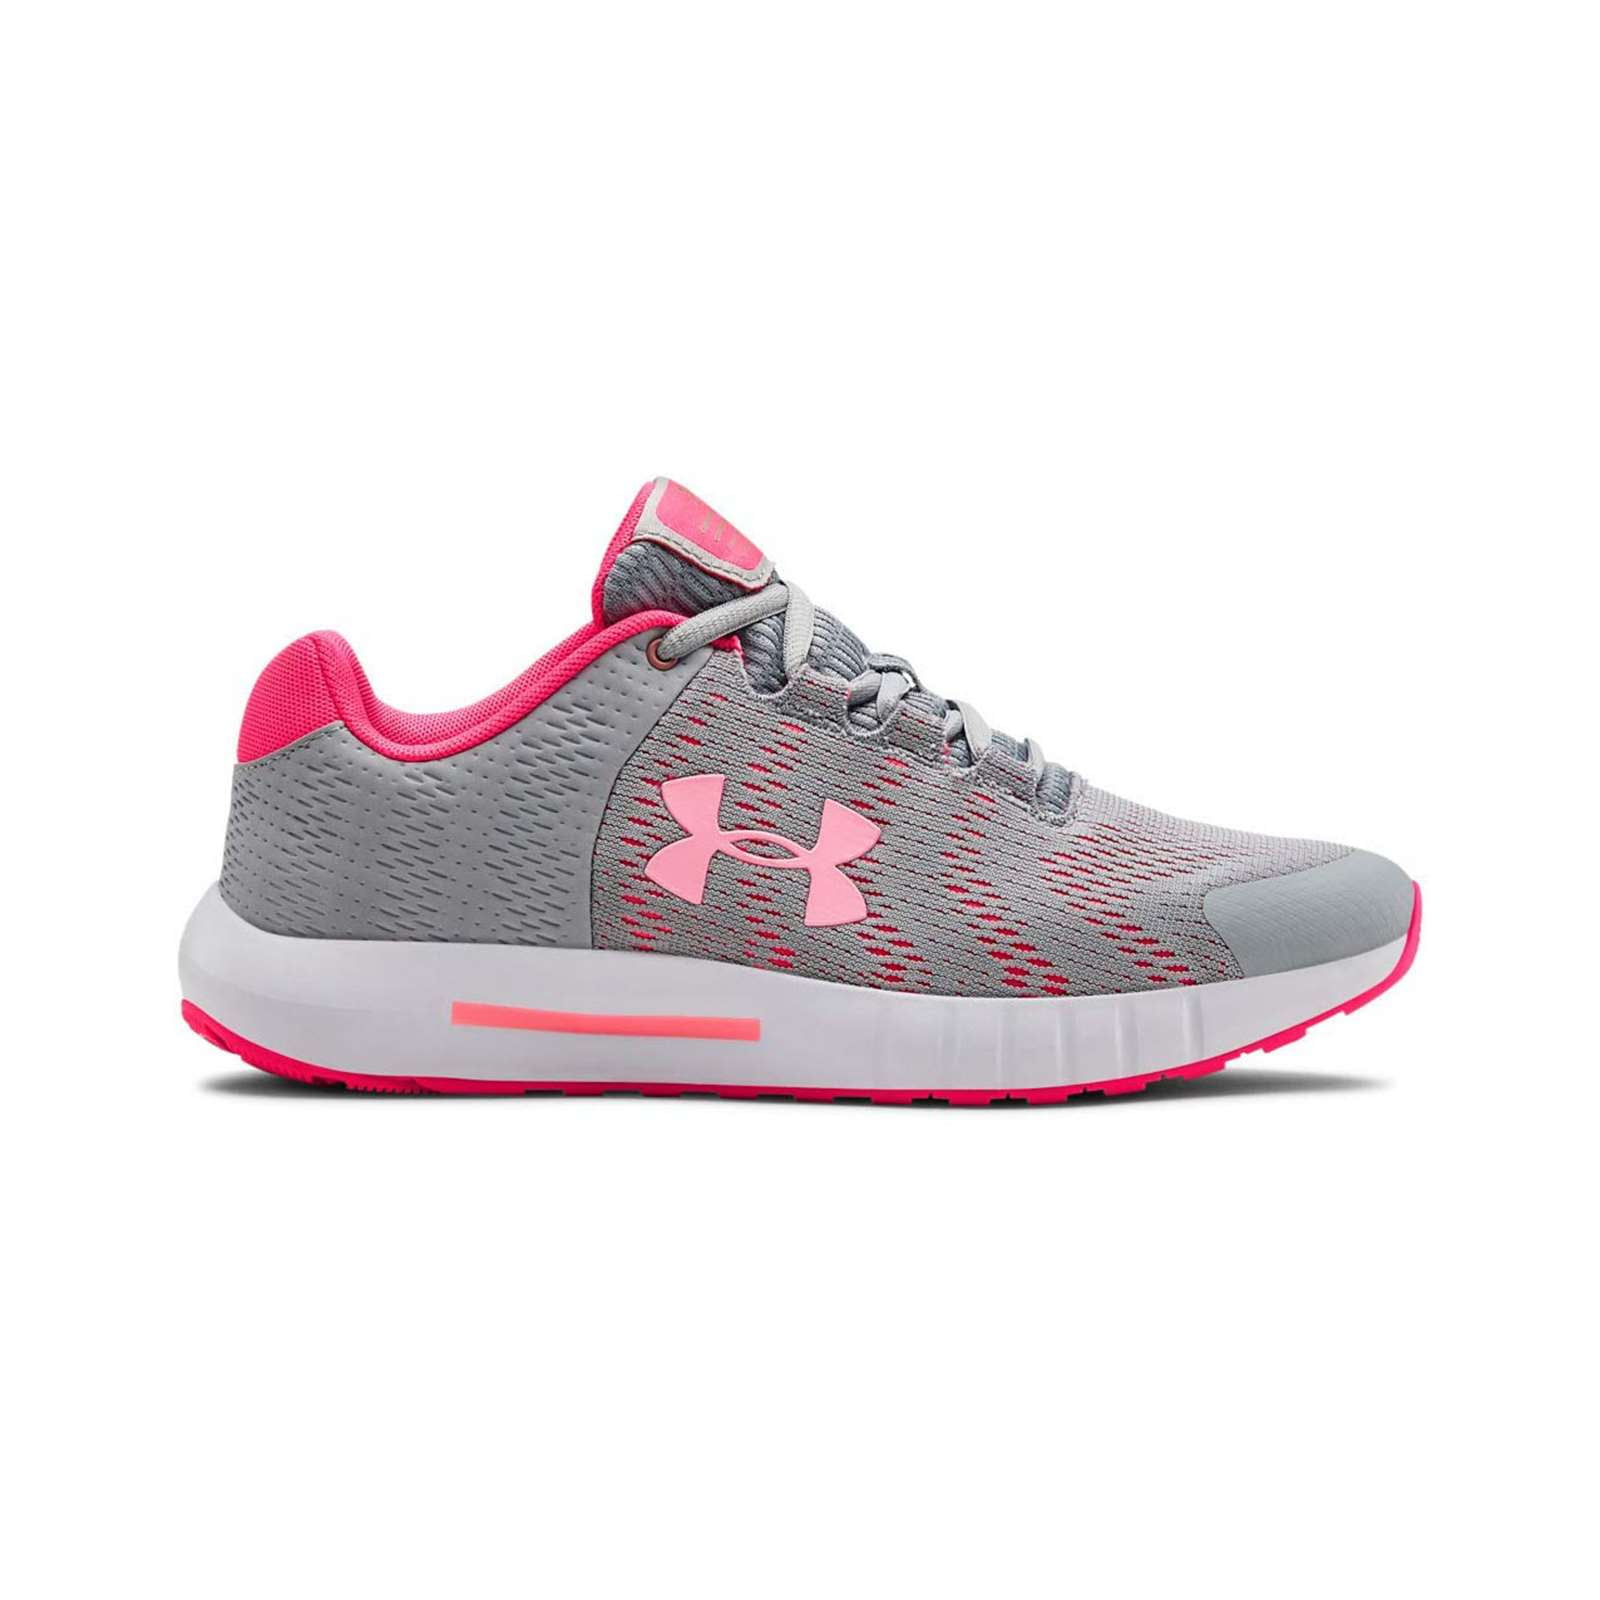 under armour shoes for girls